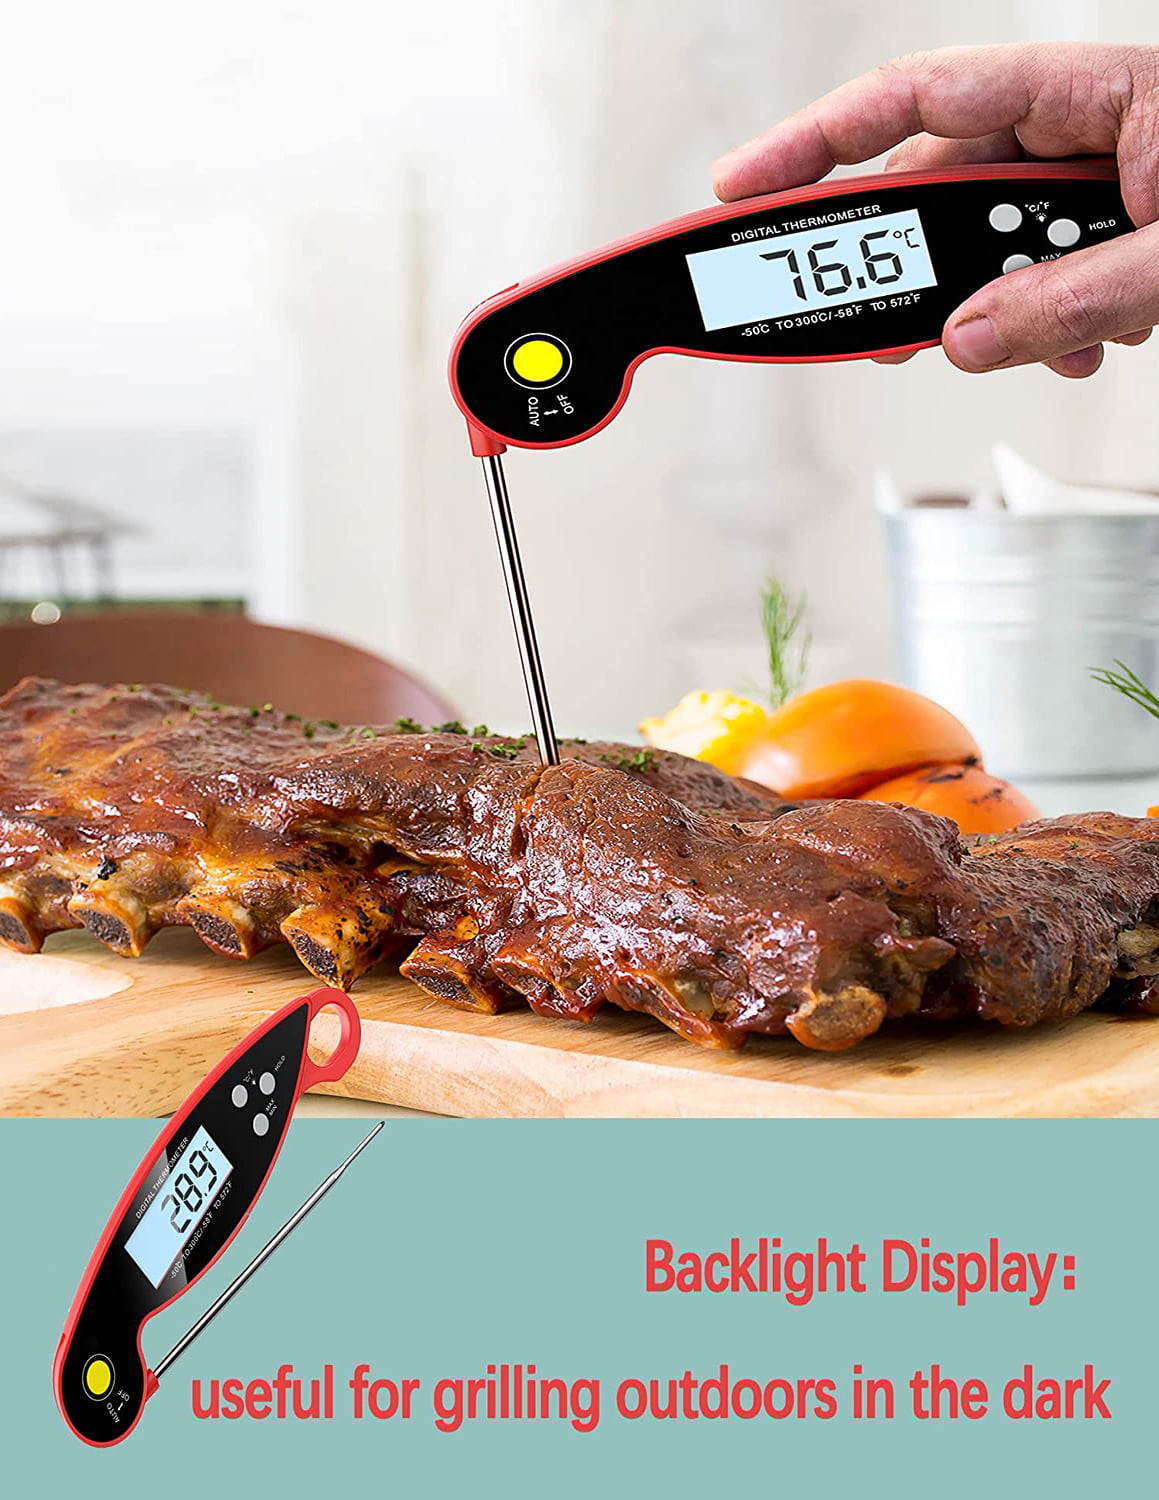 Armeator Meat Thermometer for Grilling and Cooking, 932°F High-Temperature,  229FT Range Digital Food Probe. Wireless Bluetooth Meat Thermometer for